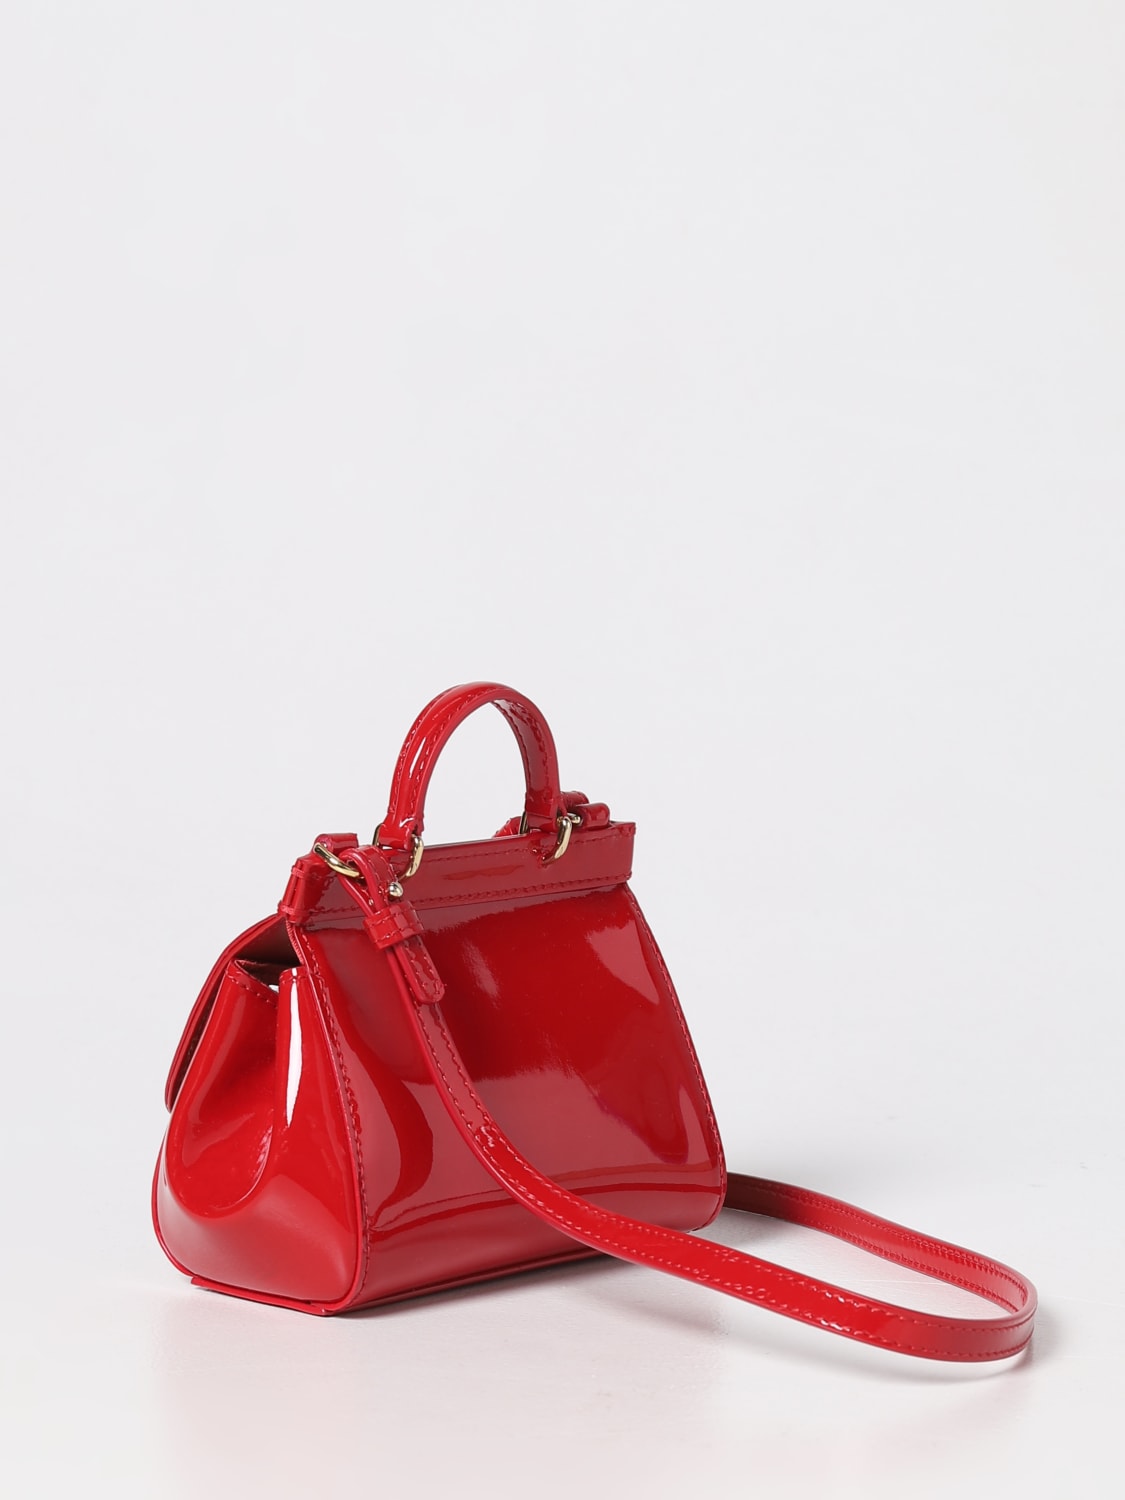 Dolce & Gabbana Sicily Small Patent Leather Top-Handle Bag